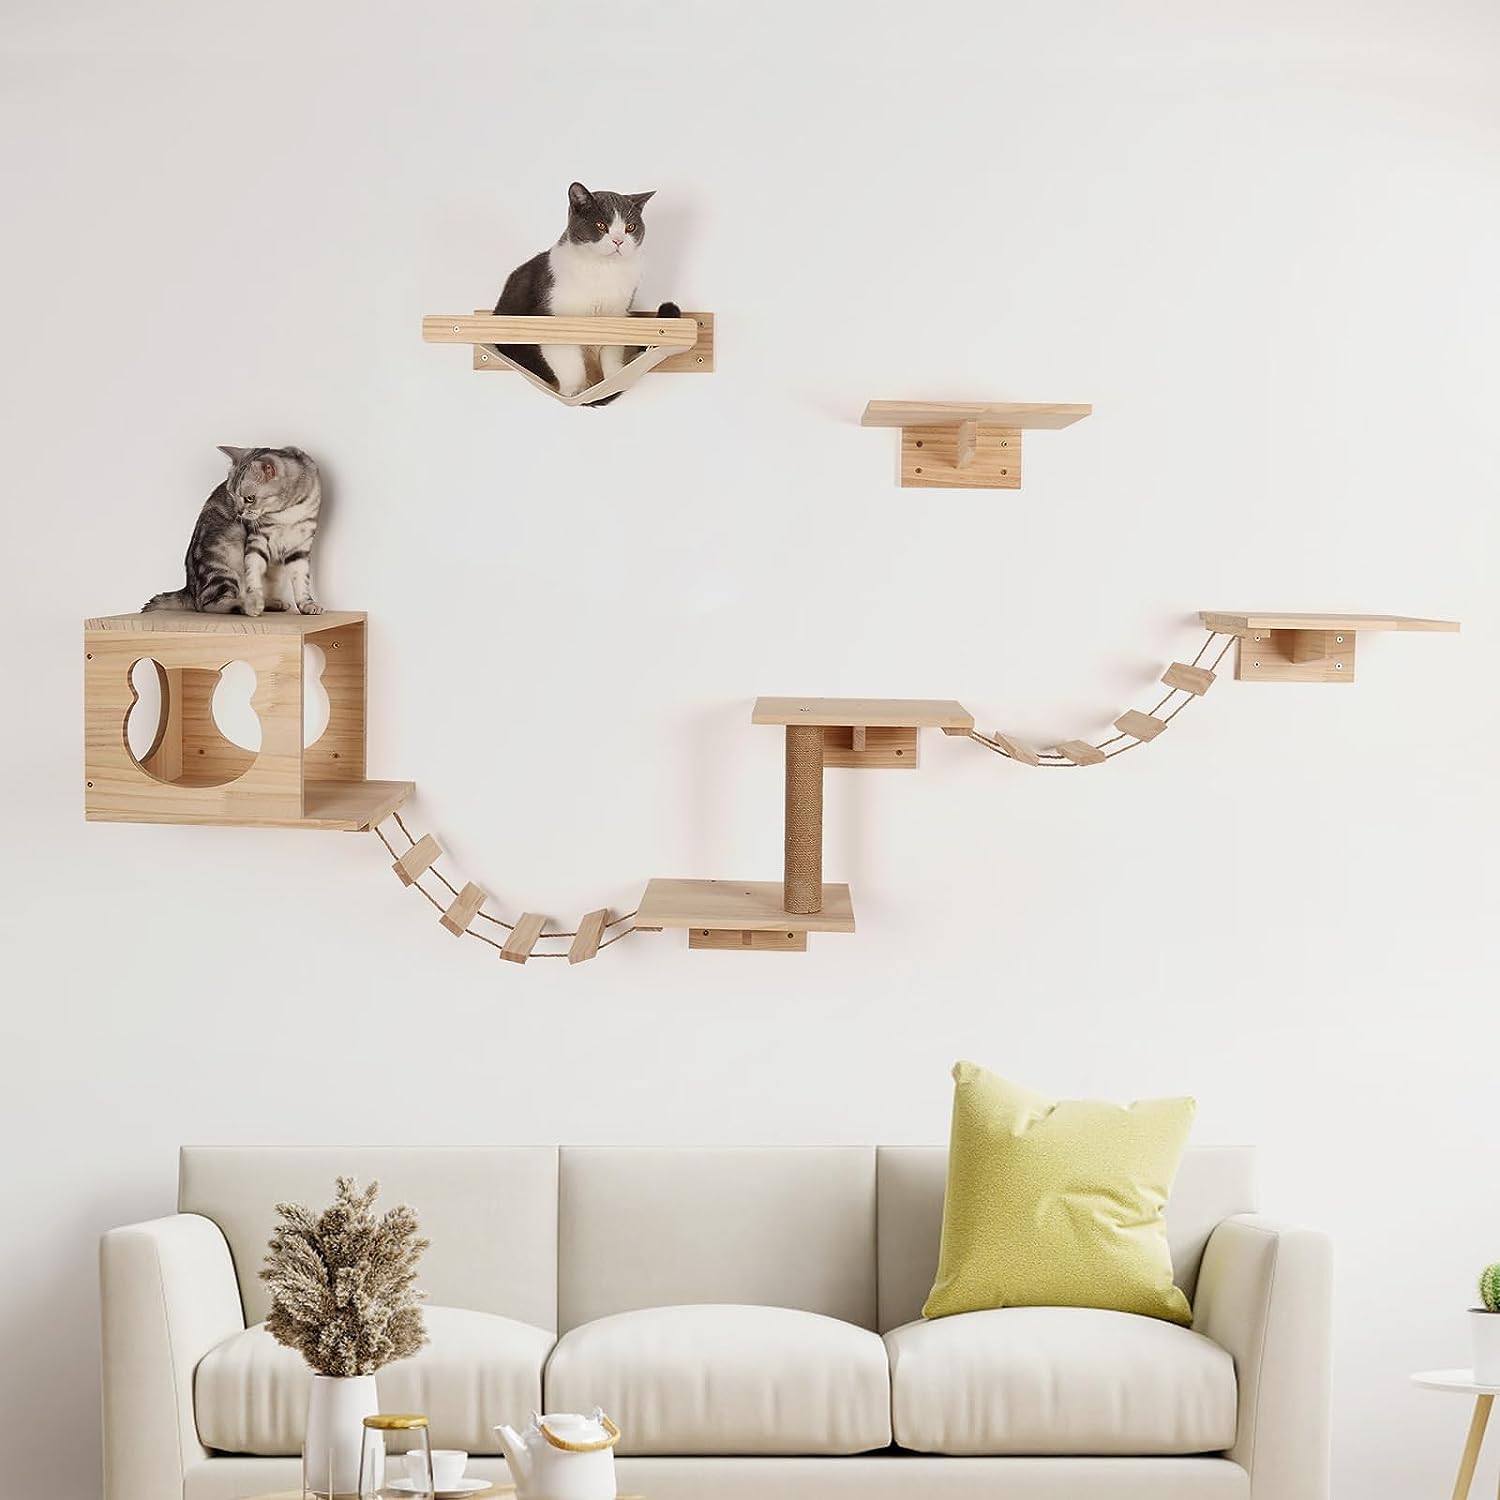 LUCKUP Cat Wall Shelves,Cat Wall Furniture and Perches for Indoor,Cat Wall Furniture with Hammock, Scratching Post, Cat House, and Cat Bed Included 9pcs/Set